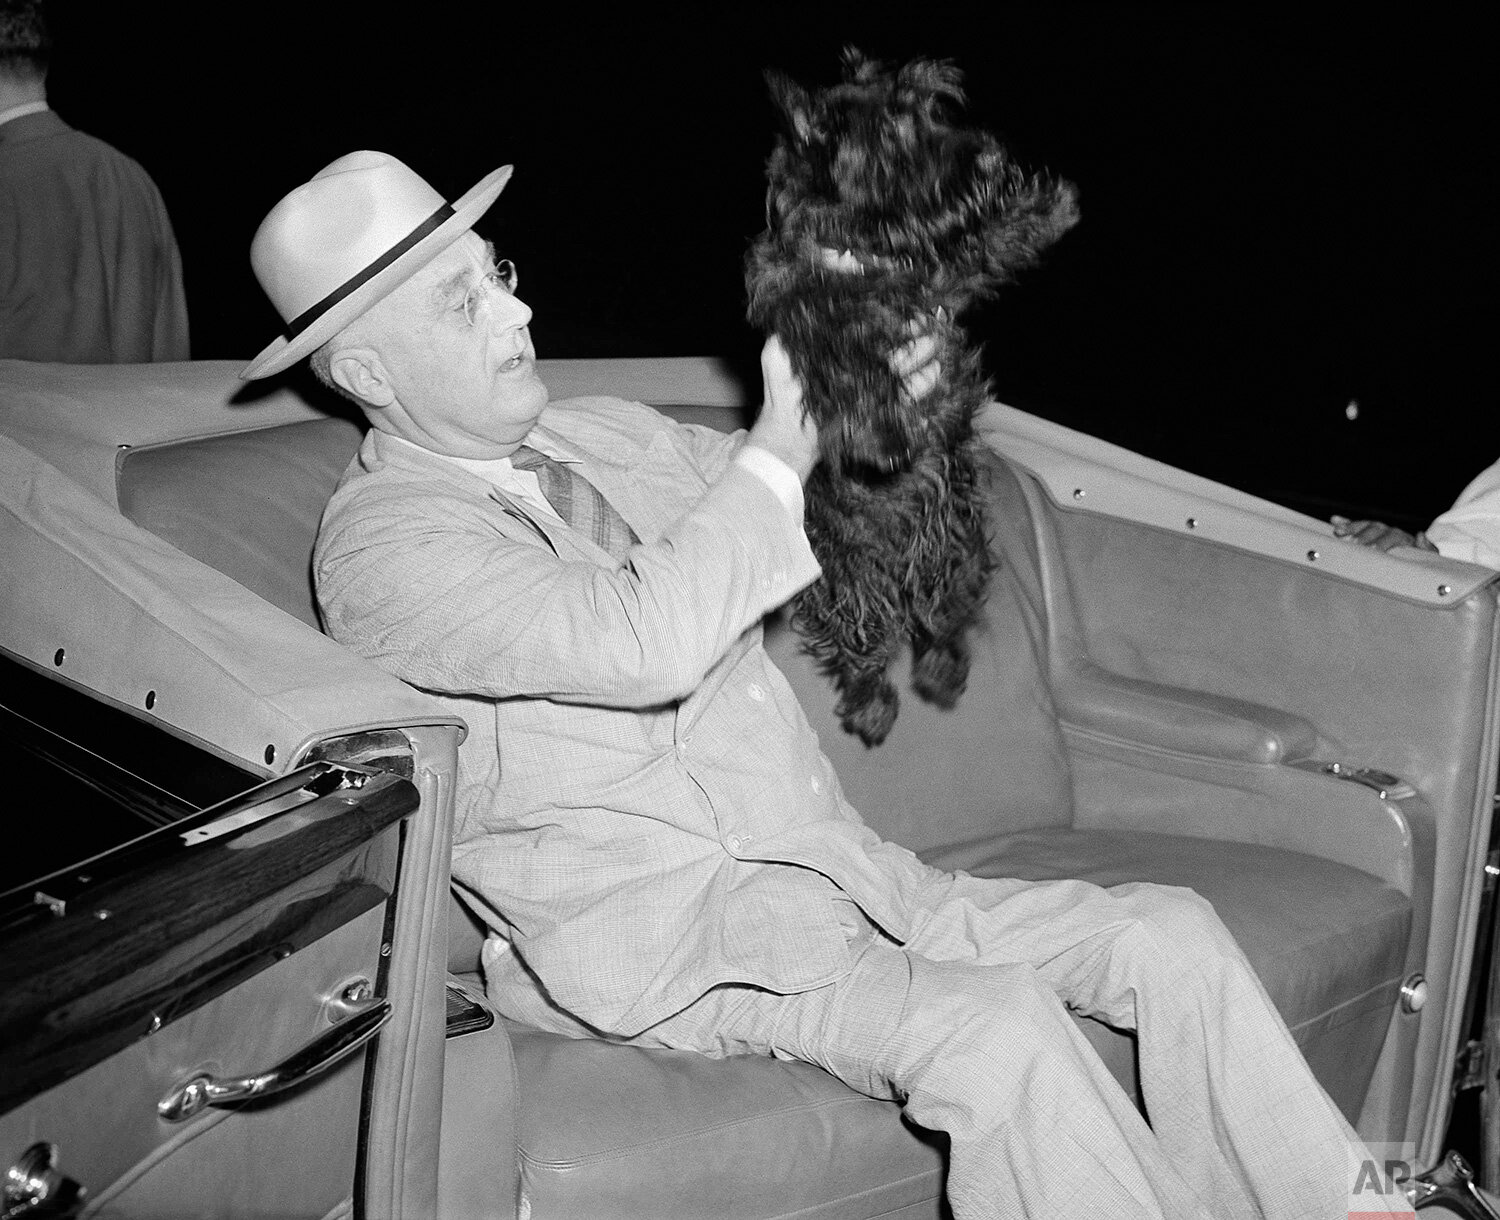  President Franklin D. Roosevelt lifts his dog Fala as he prepares to motor from his special train to the Yacht Potomac at New London, Conn., Aug. 3, 1941.  (AP Photo/George Skadding) 